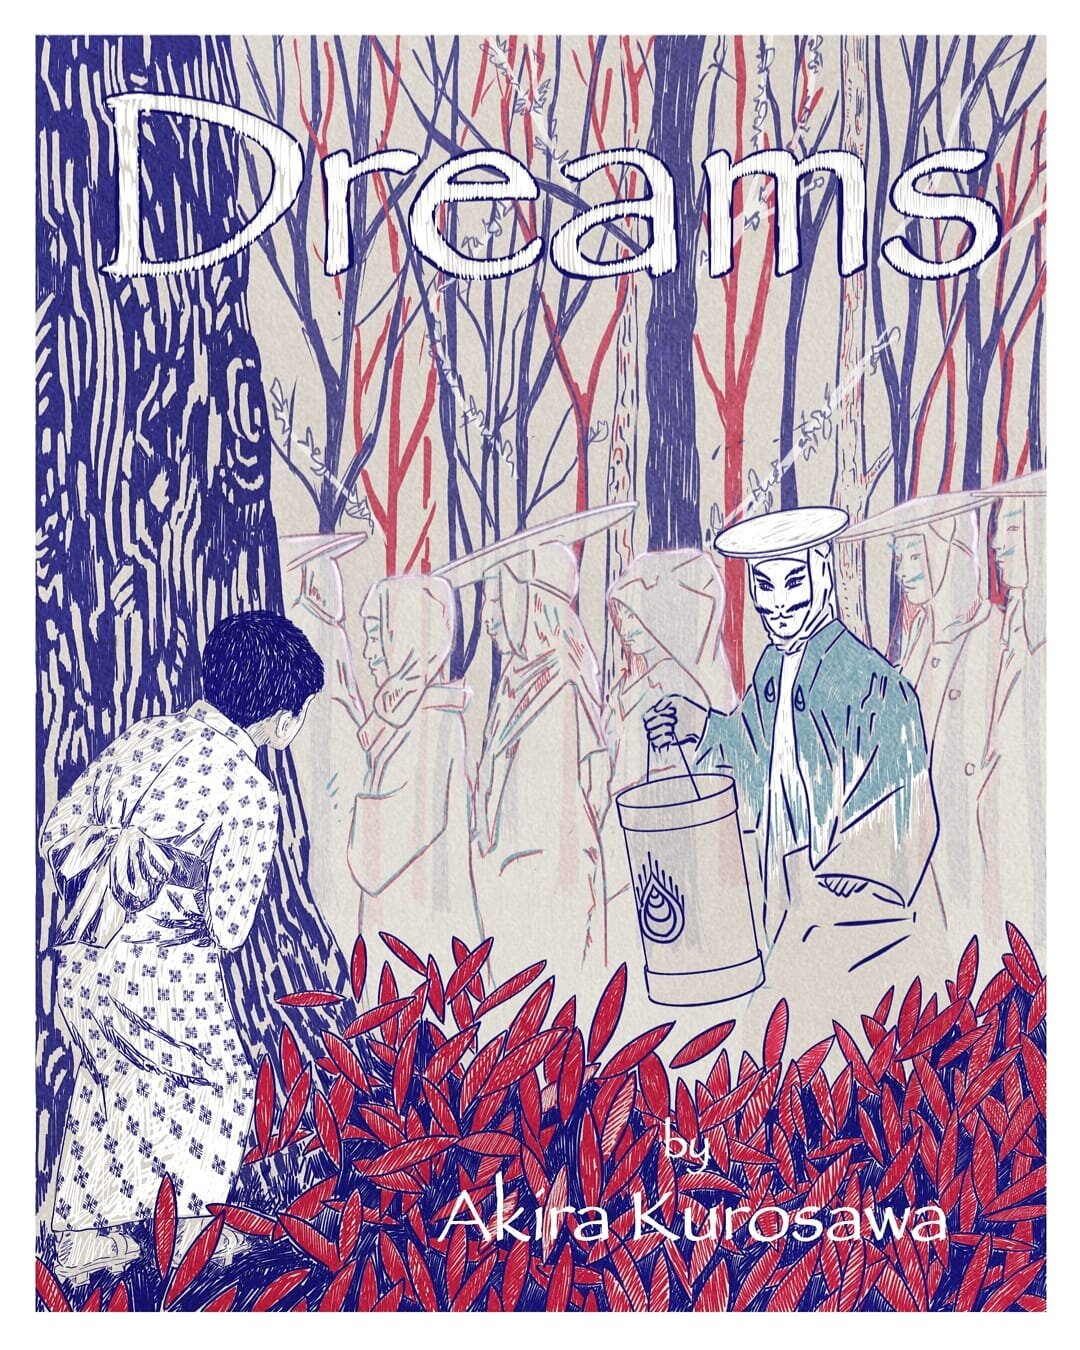 This is a film poster that I had to do for the @visualartspassage course. The movie I chose is &quot;Dreams&quot; by Akira Kurosawa. 

#digitaldrawing #digitalillustration #digitalart #digitalpainting #digitalartist #digitalsketch #digitalsketching #